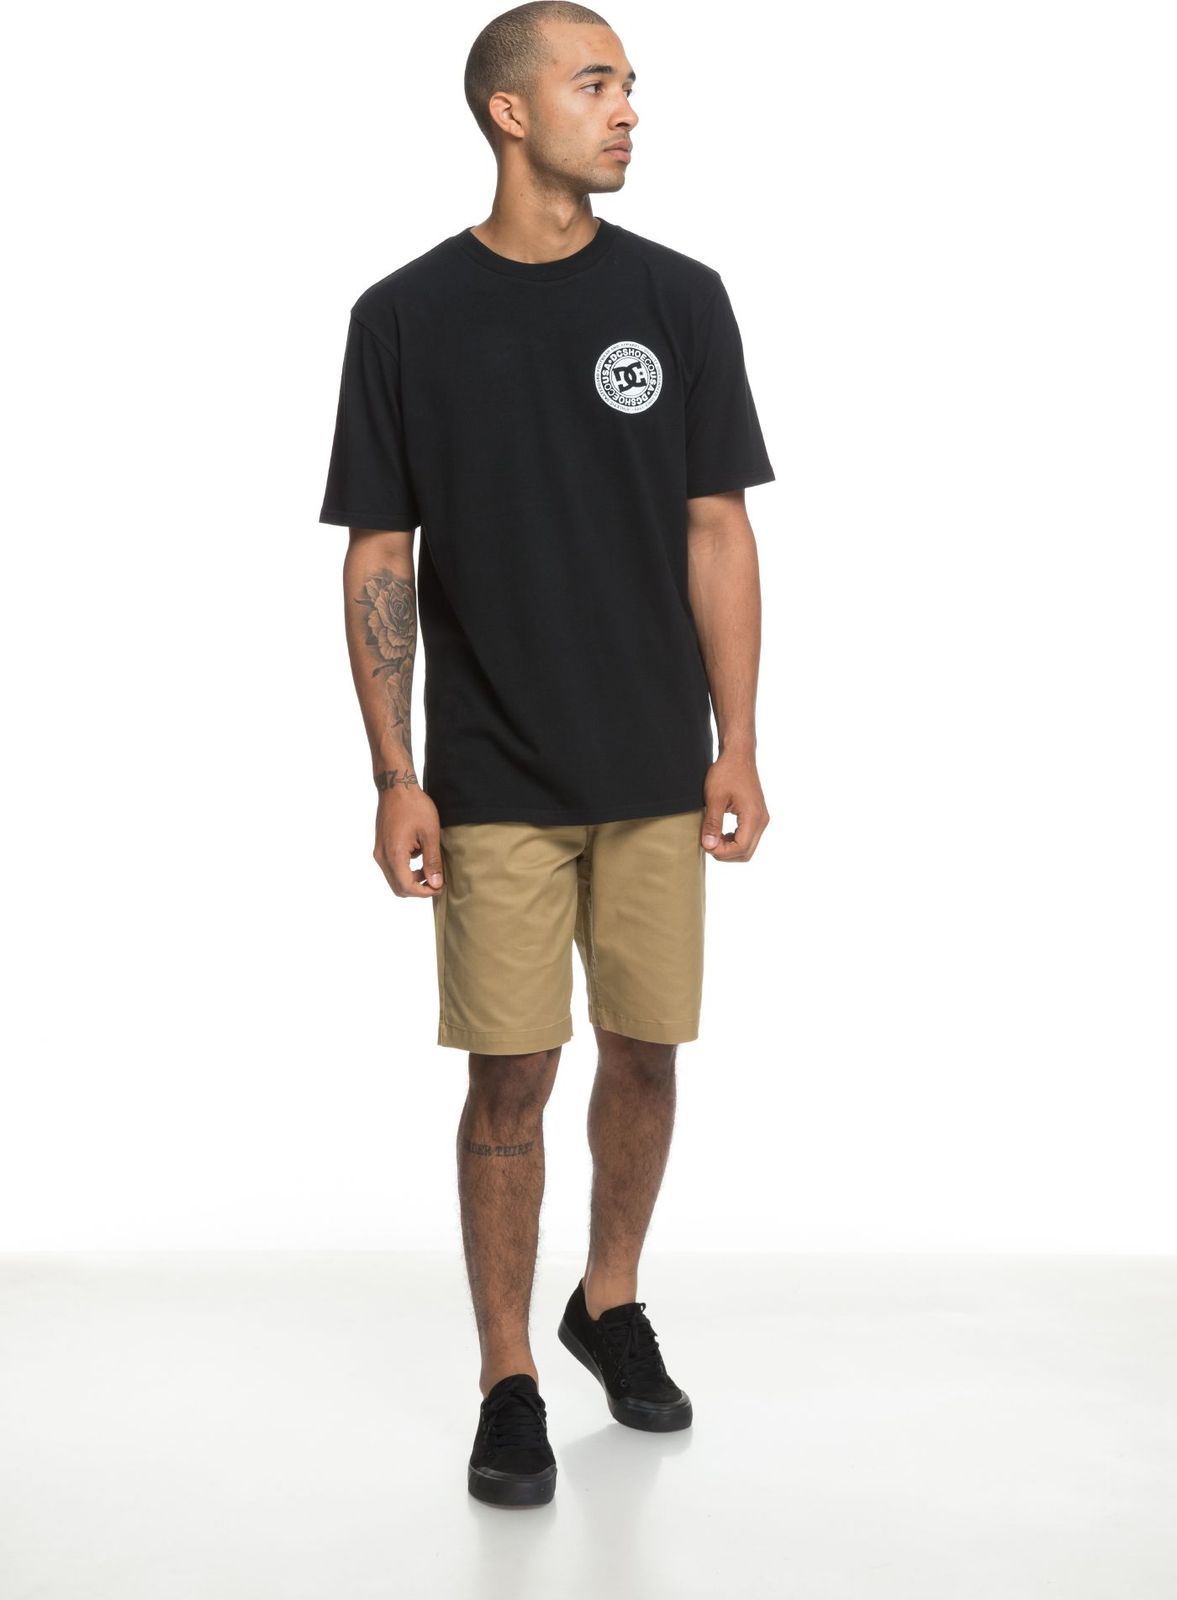   DC Shoes Worker Straight, : . EDYWS03111-CLM0.  34 (48/50)